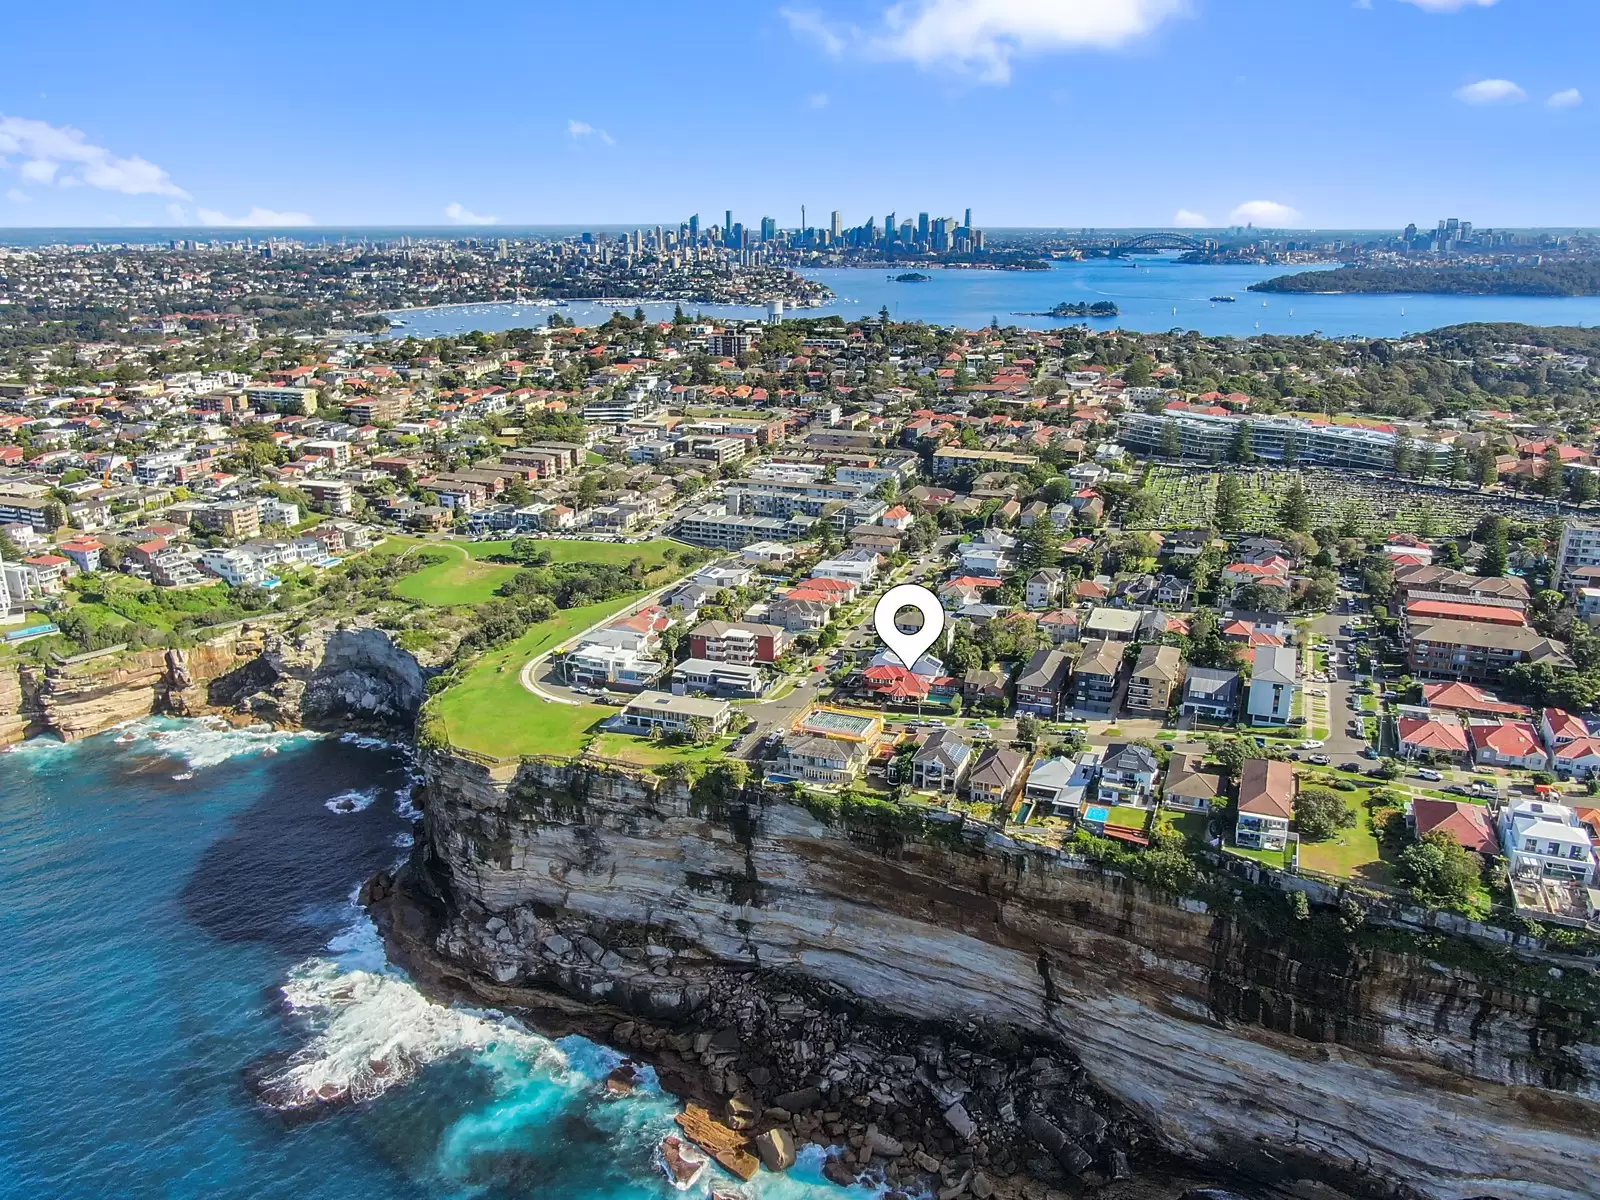 Photo #3: 24 MacDonald Street (also Known As 14 Marne Street), Vaucluse - Sold by Sydney Sotheby's International Realty